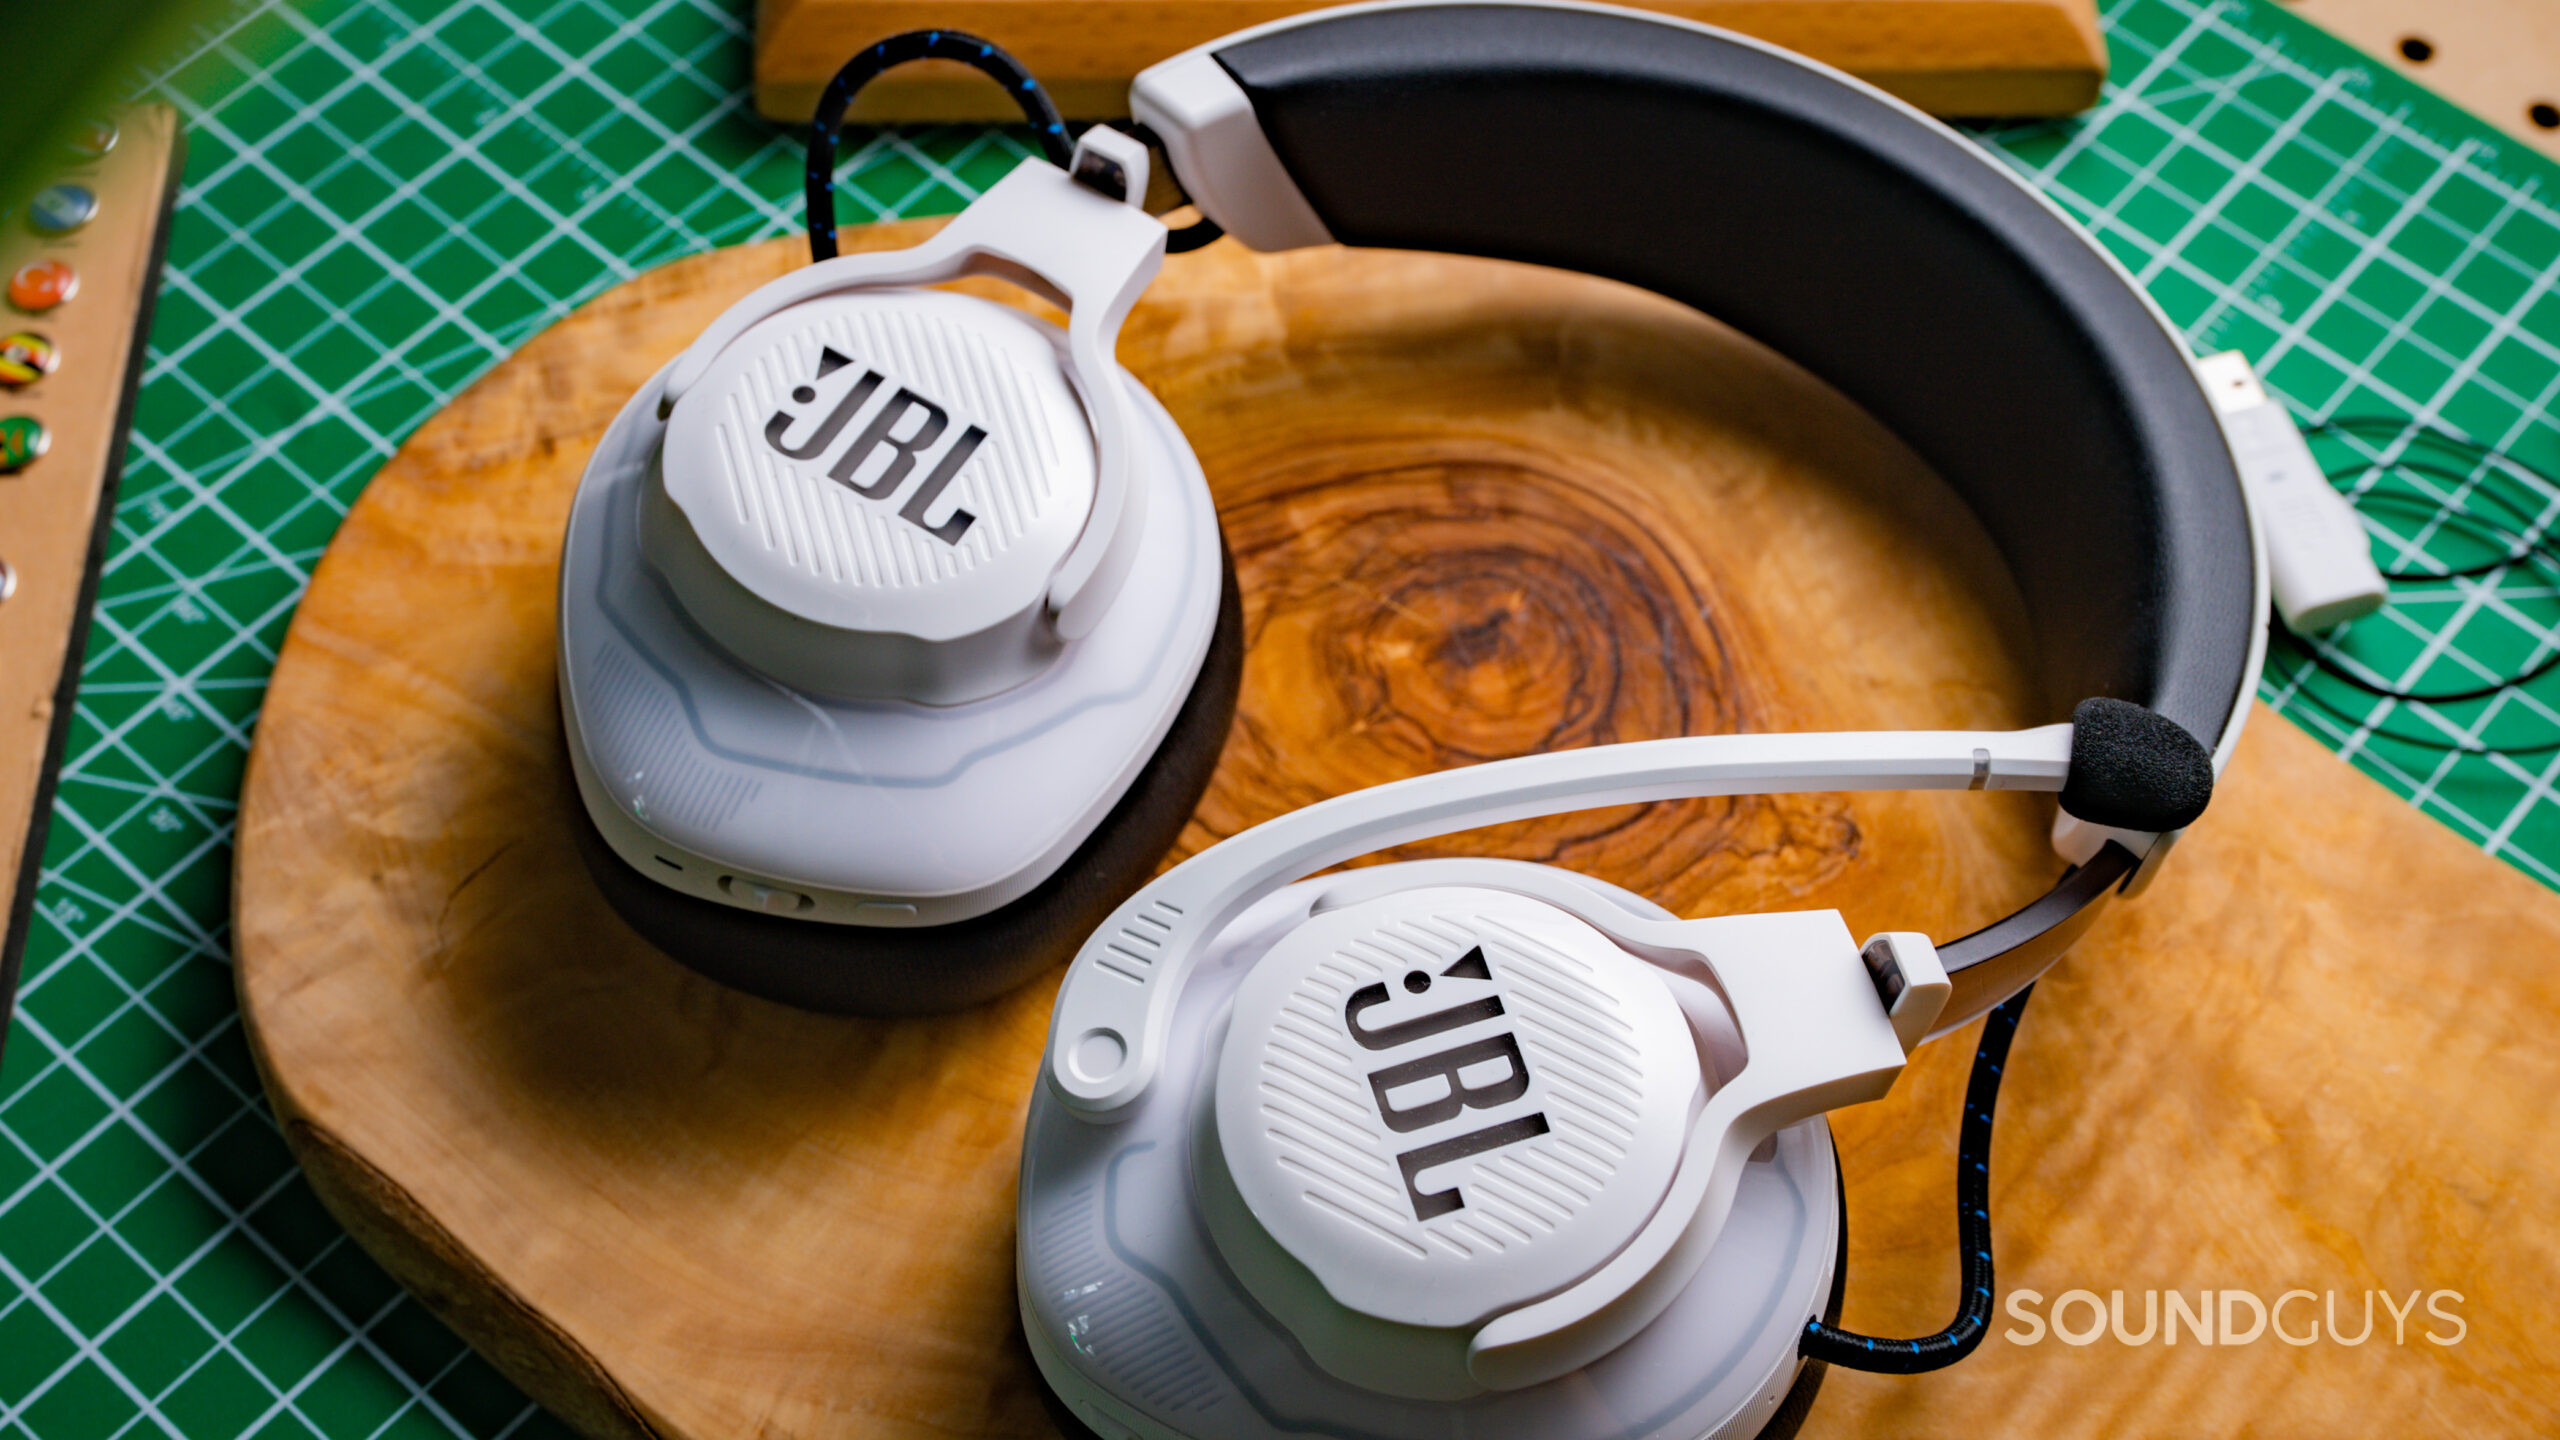 The JBL Quantum 910P sitting on a tabletop with the JBL logos on both ear cups clearly visible.